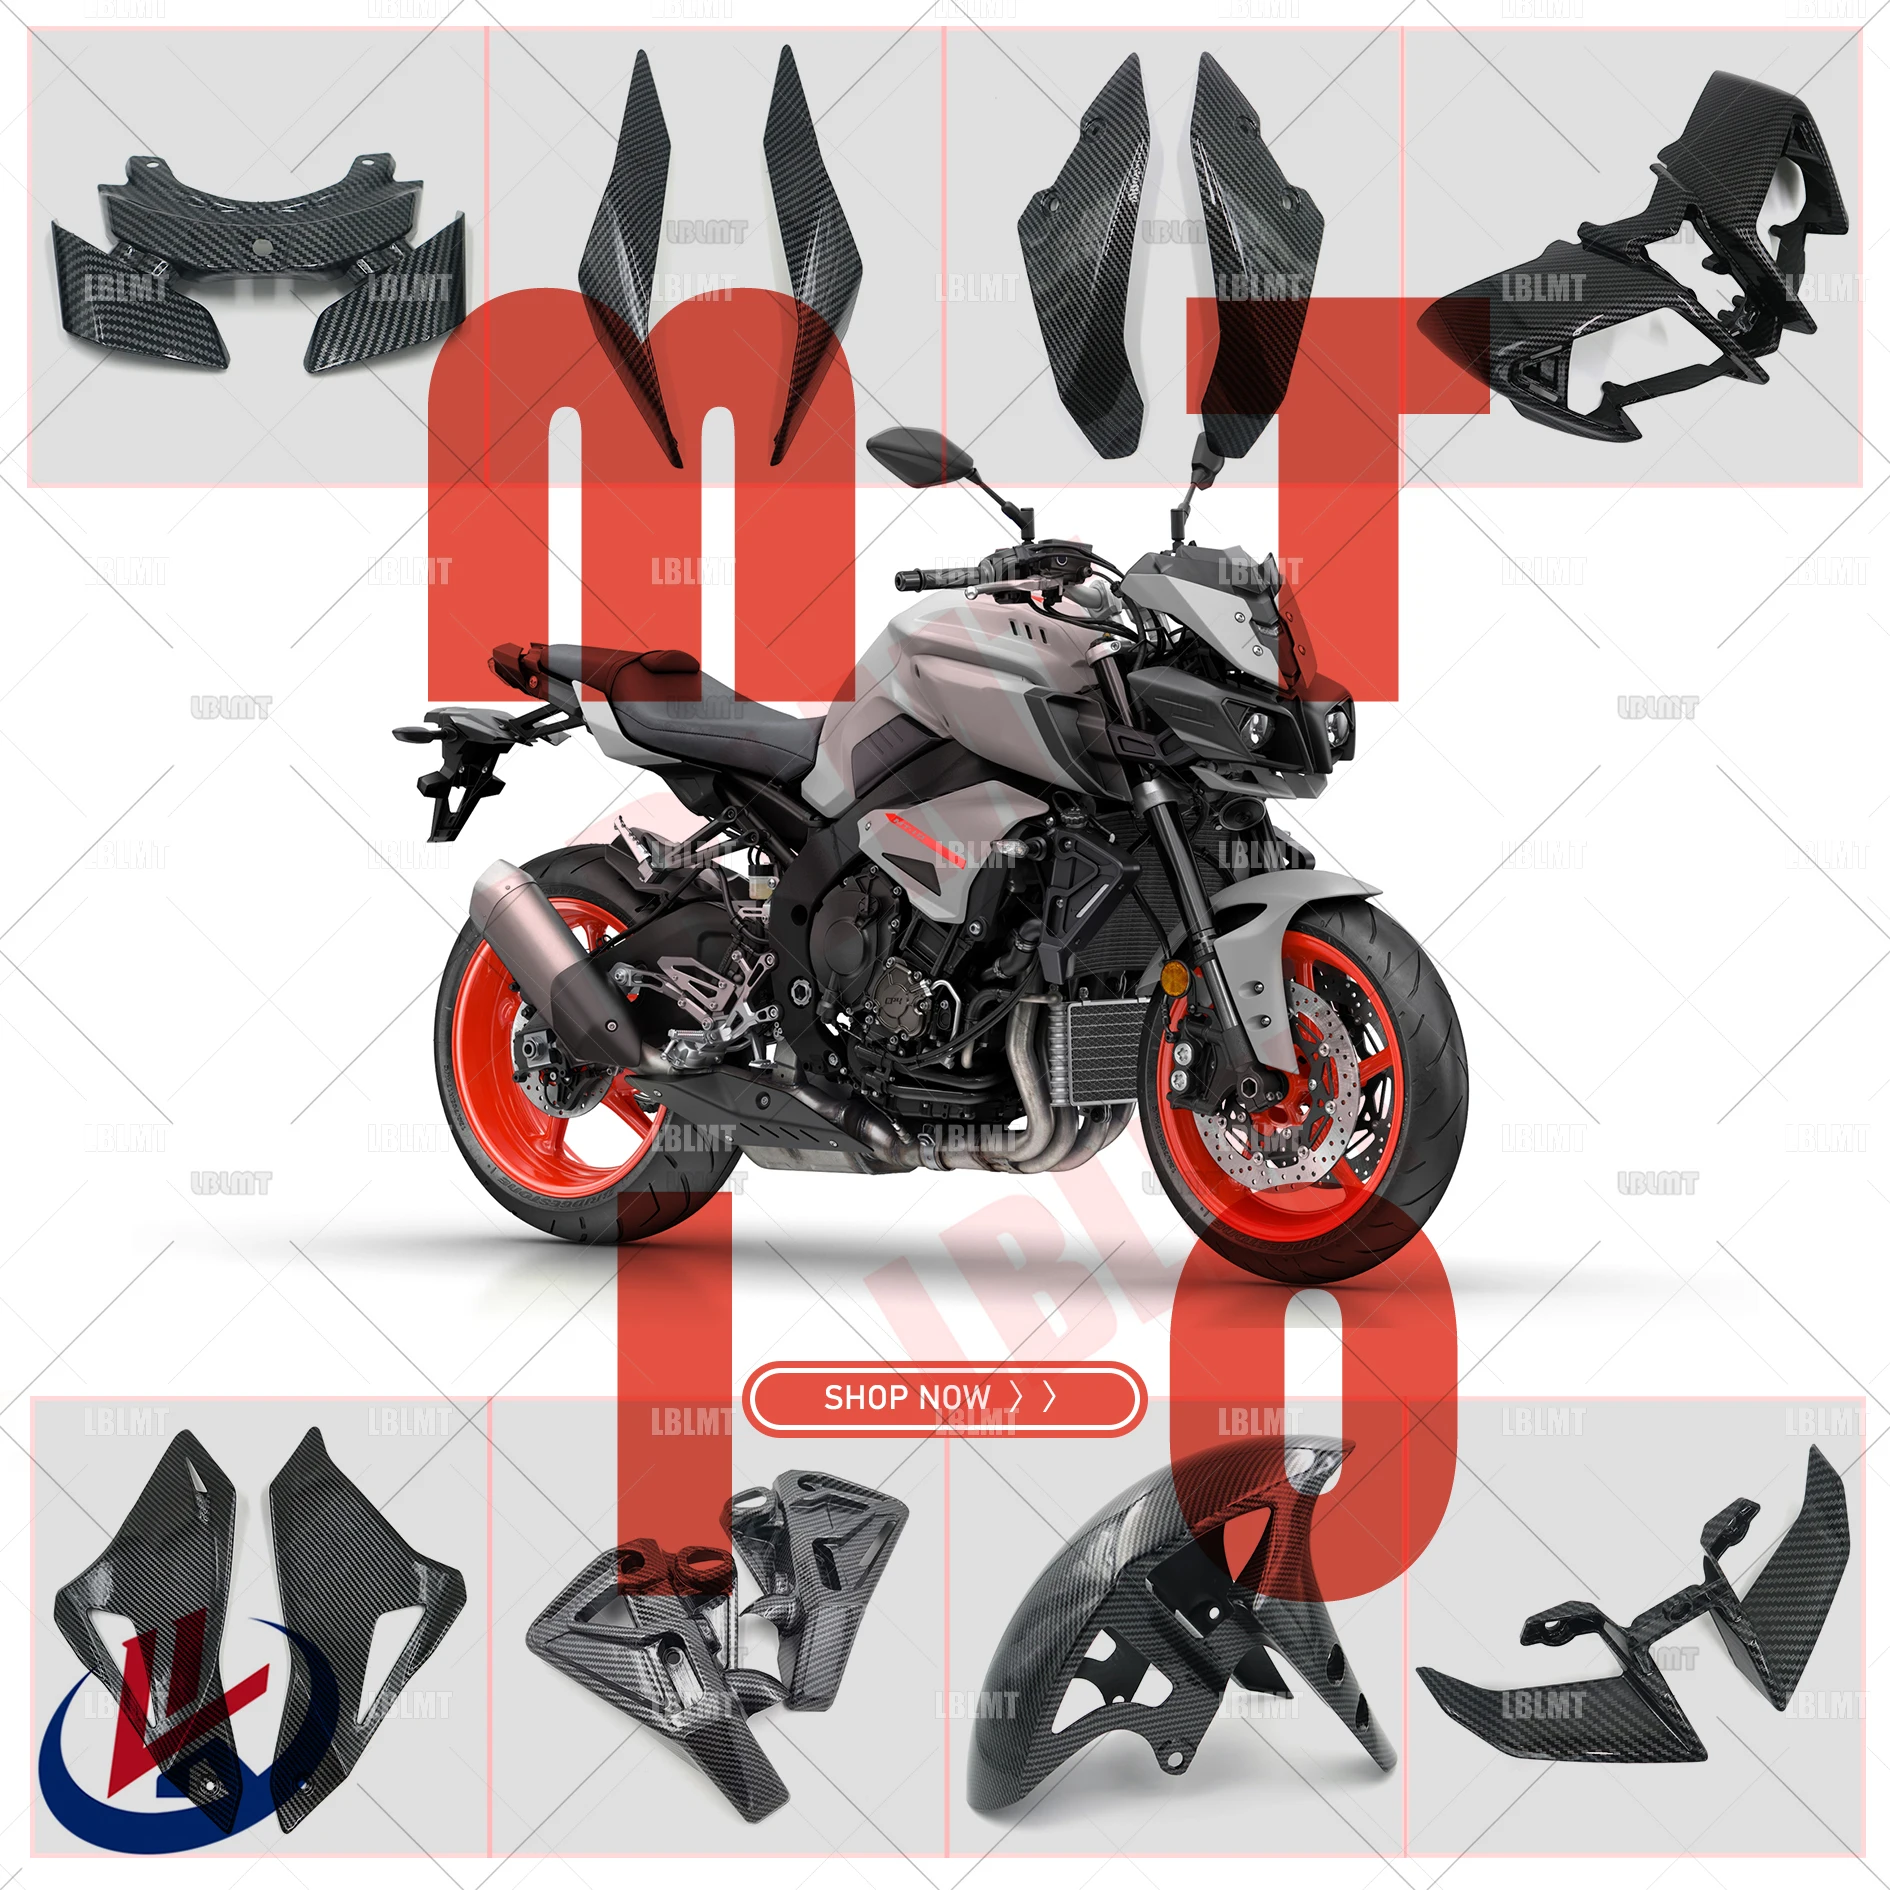 

For YAMAHA FZ10 MT10 FZ-10 MT-10 2017 2018 2019 2020 Motorcycle Fairings Injection Mold Painted ABS Plastic Bodywork Kit Sets